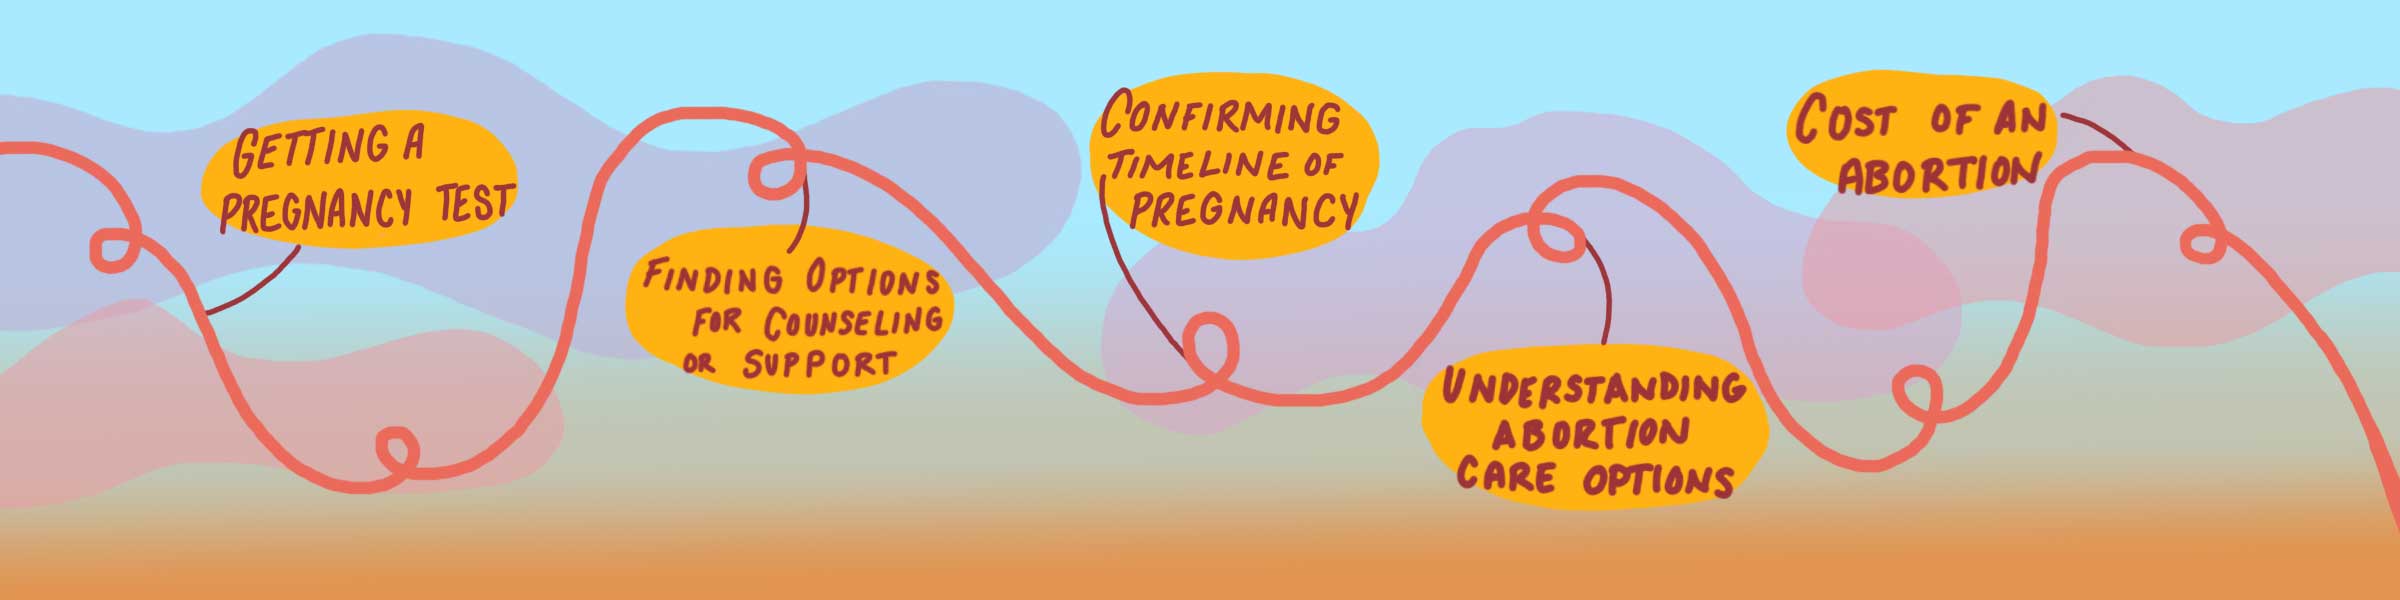 Illustrated infographic of a wavy line that reads, “Getting a pregnancy test - Finding options for counseling or support - Confirming timeline of pregnancy - Understanding abortion care options - cost of an abortion”